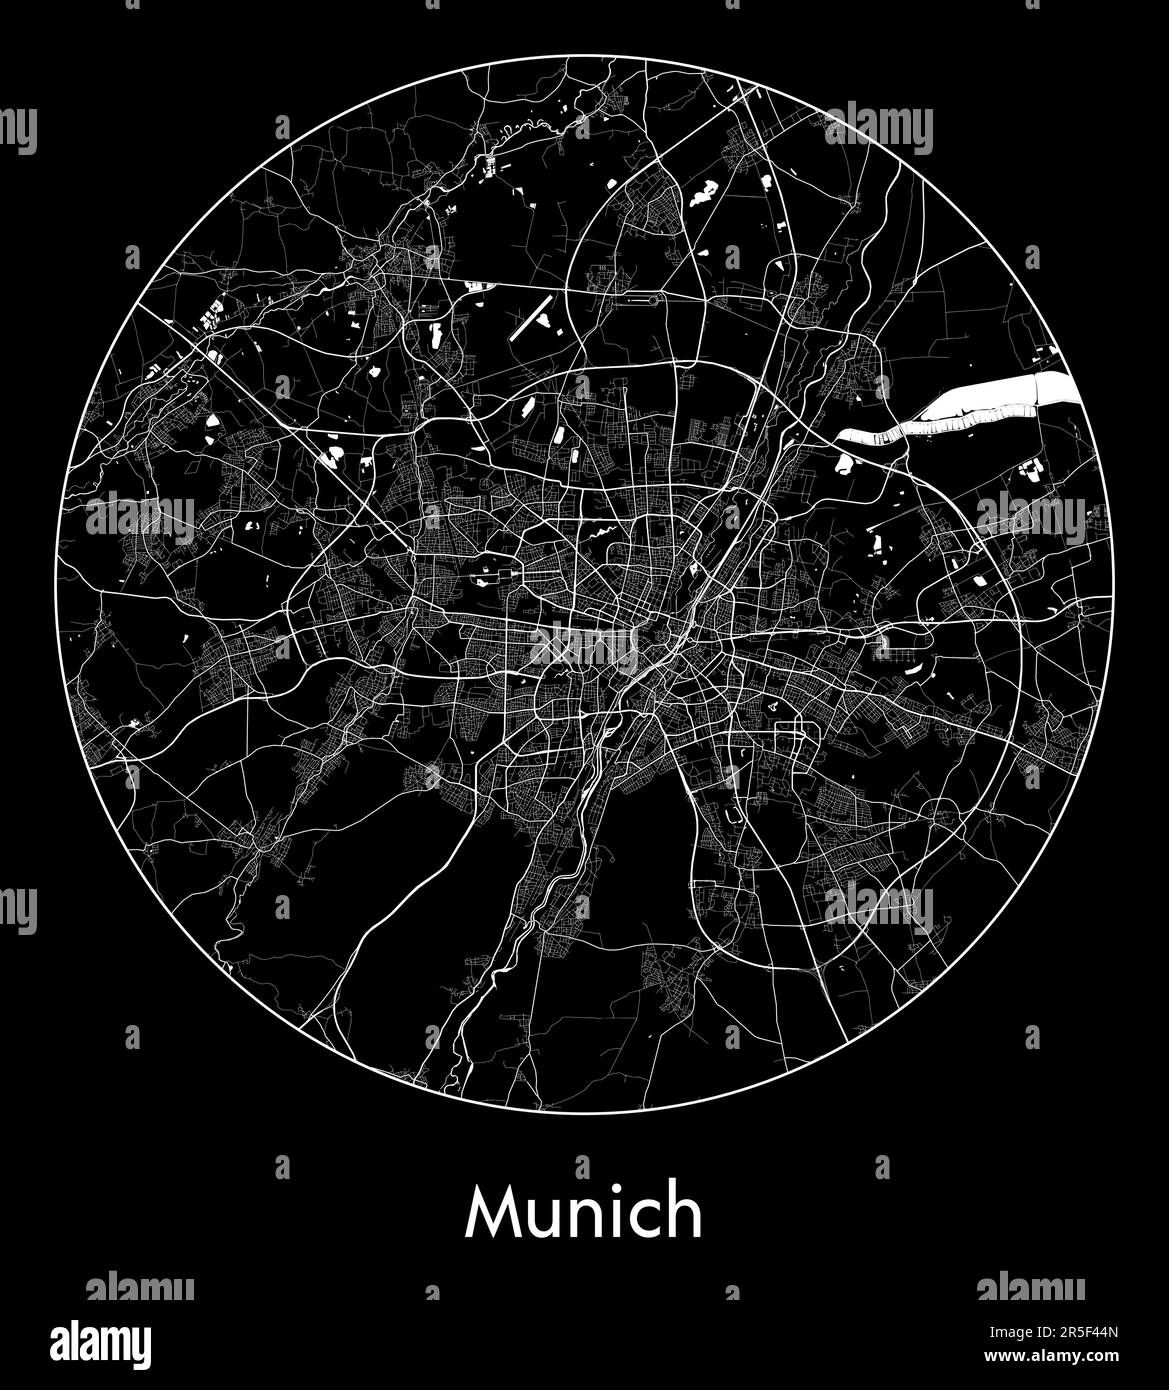 City Map Munich Germany Europe vector illustration Stock Vector